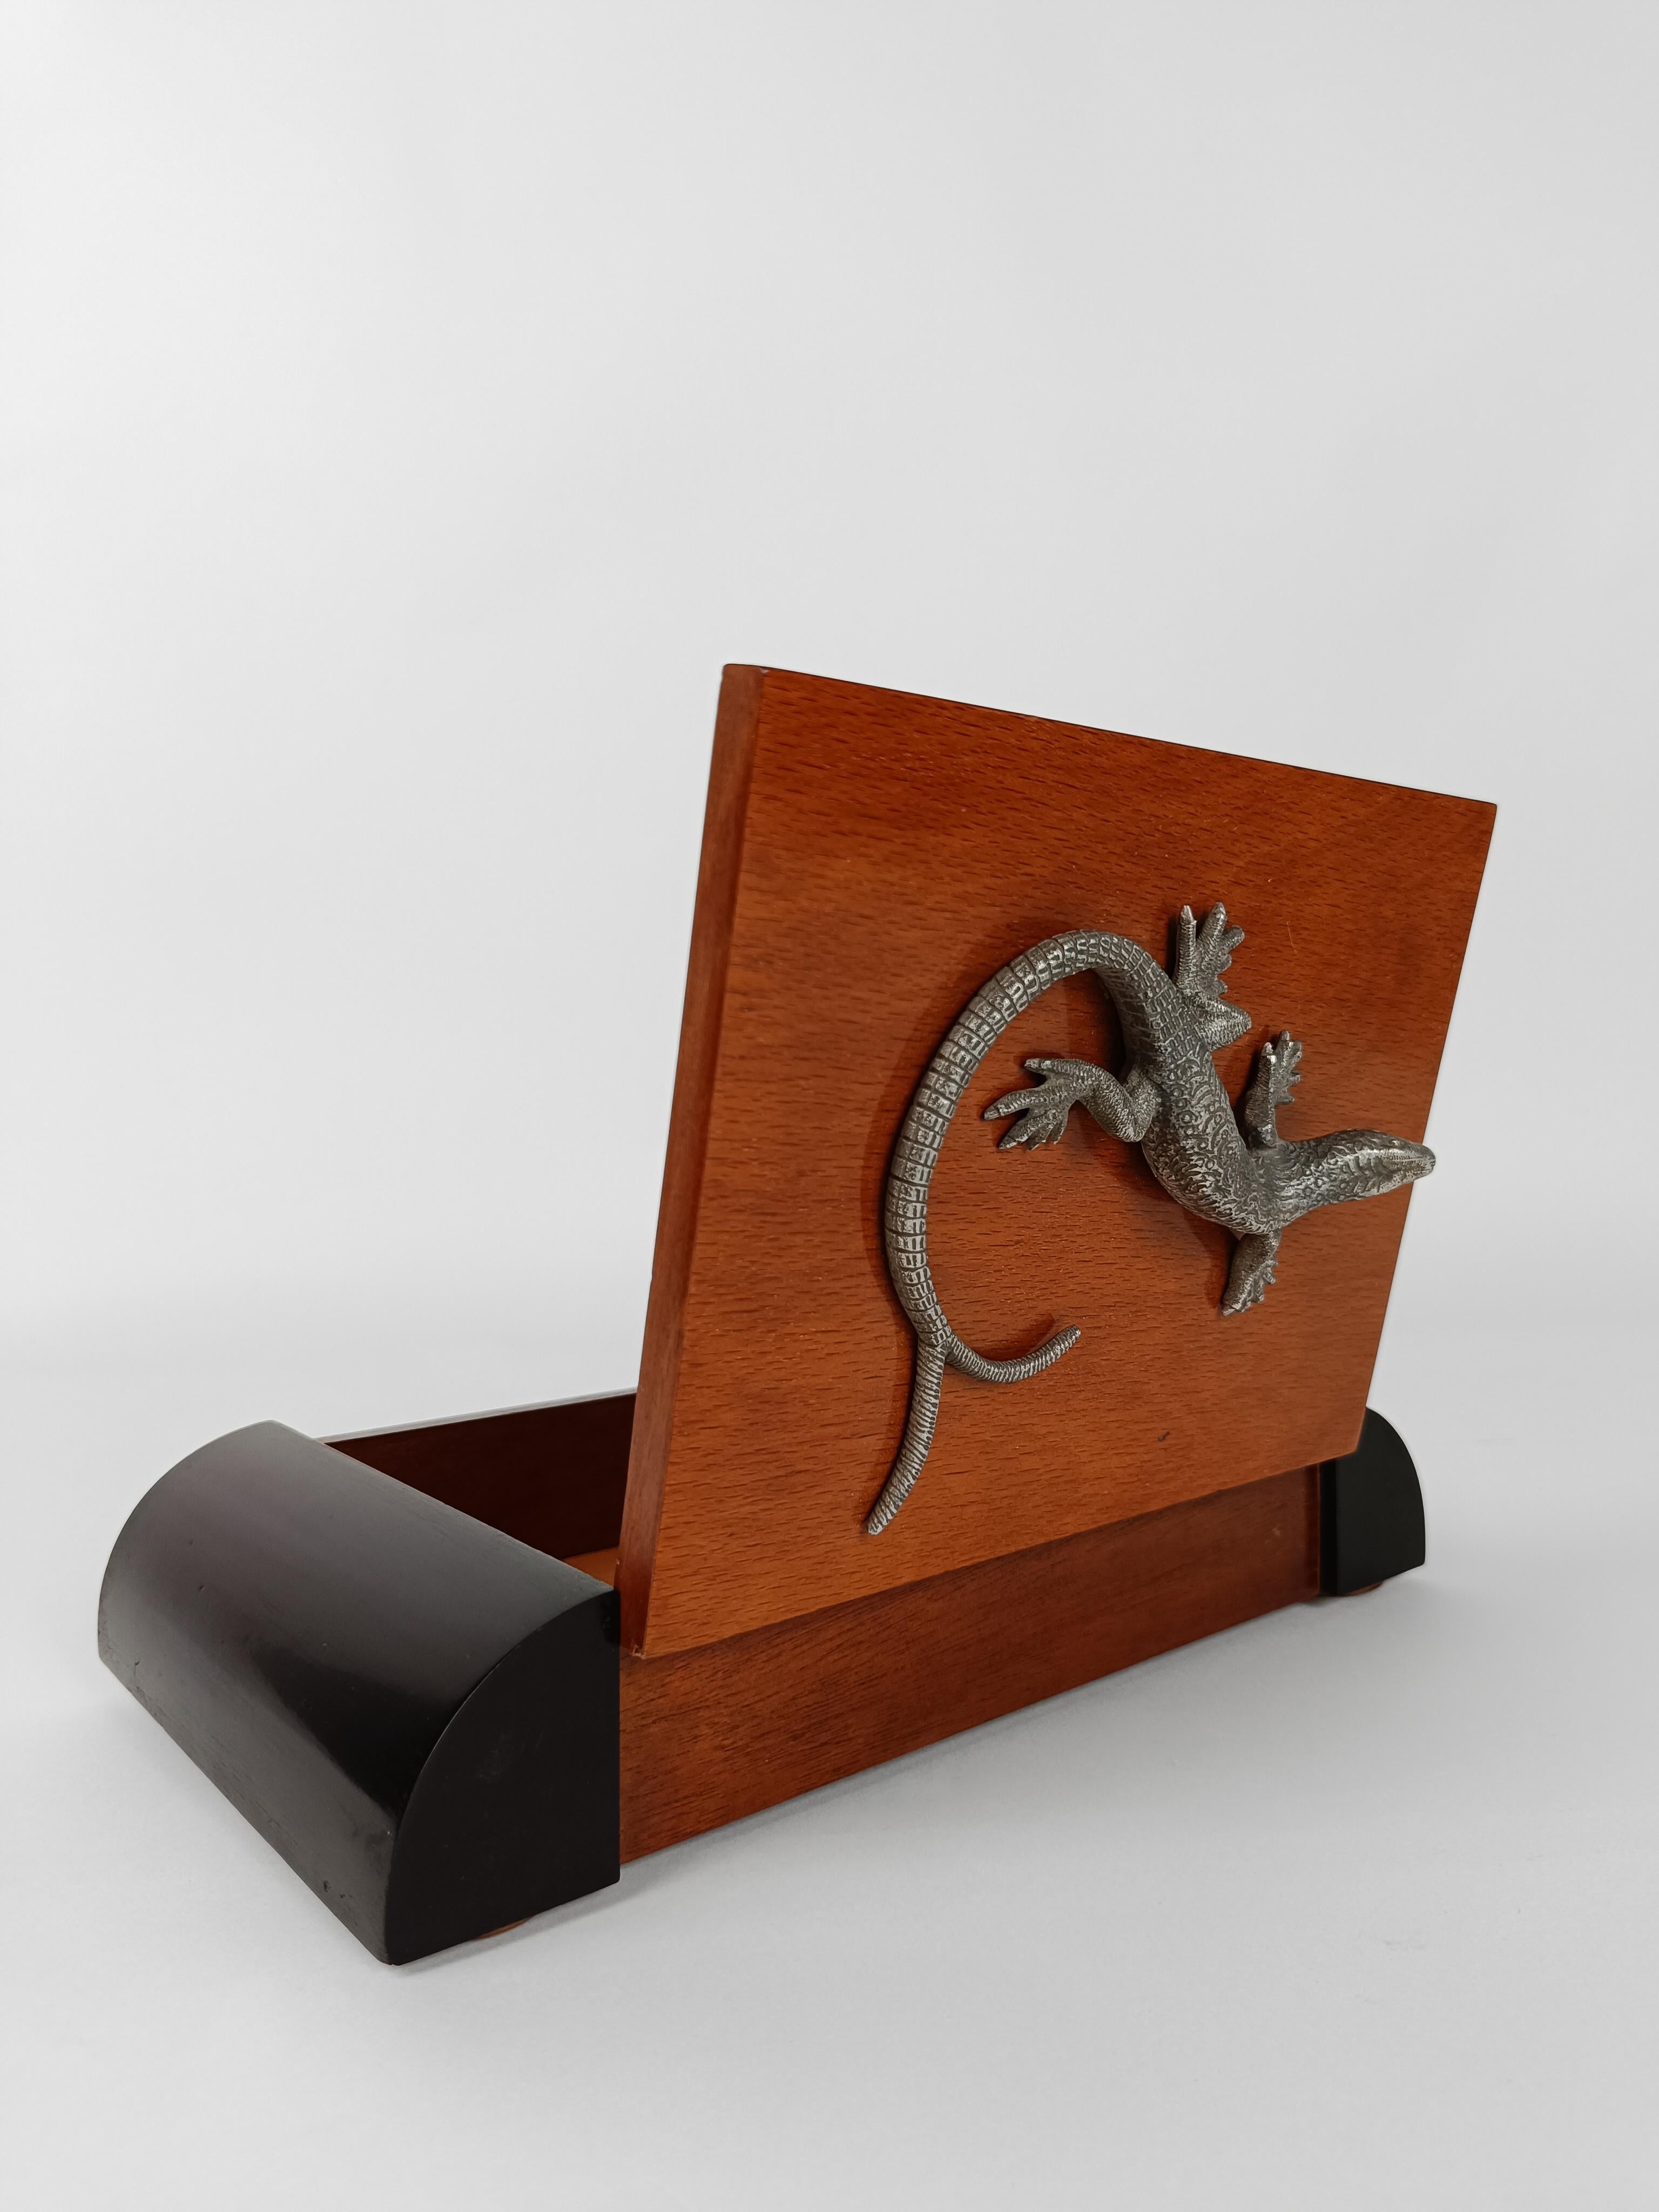 Art Deco wooden Box decorated with a Silver Tone Metal Lizard-shaped Handle For Sale 5